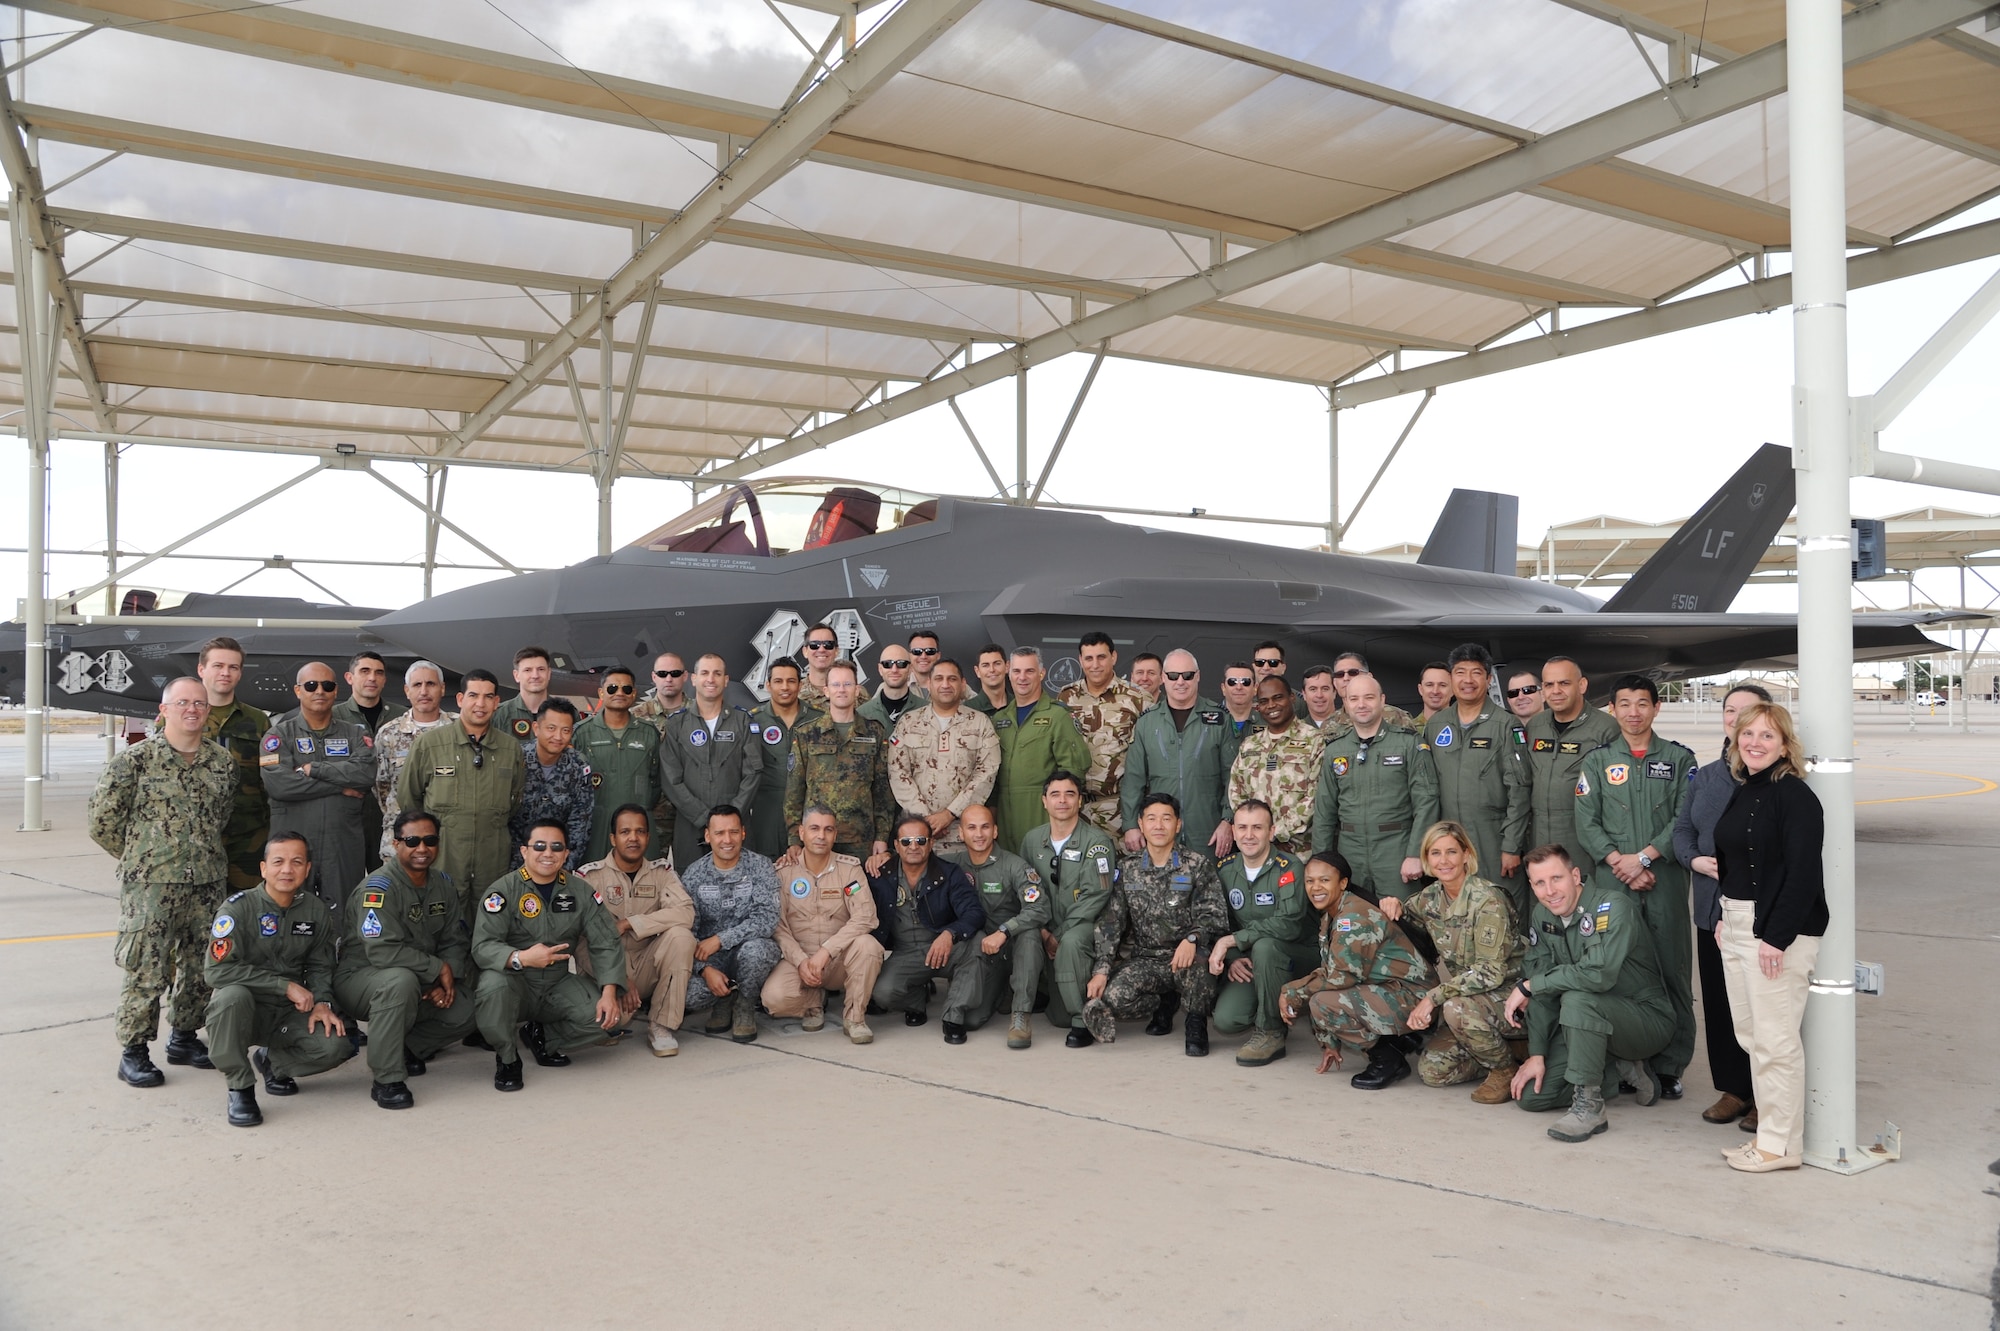 United States Air Force Air War College International Fellows students pose for a group photo in front of an F-35 Lightning II at the 63rd Fighter Squadron at Luke Air Force Base, Ariz., Feb. 28, 2018. The AWC international students received a personal look at how Luke is building the future of Airpower. (U.S. Air Force photo/Tech. Sgt. Luther Mitchell Jr.)